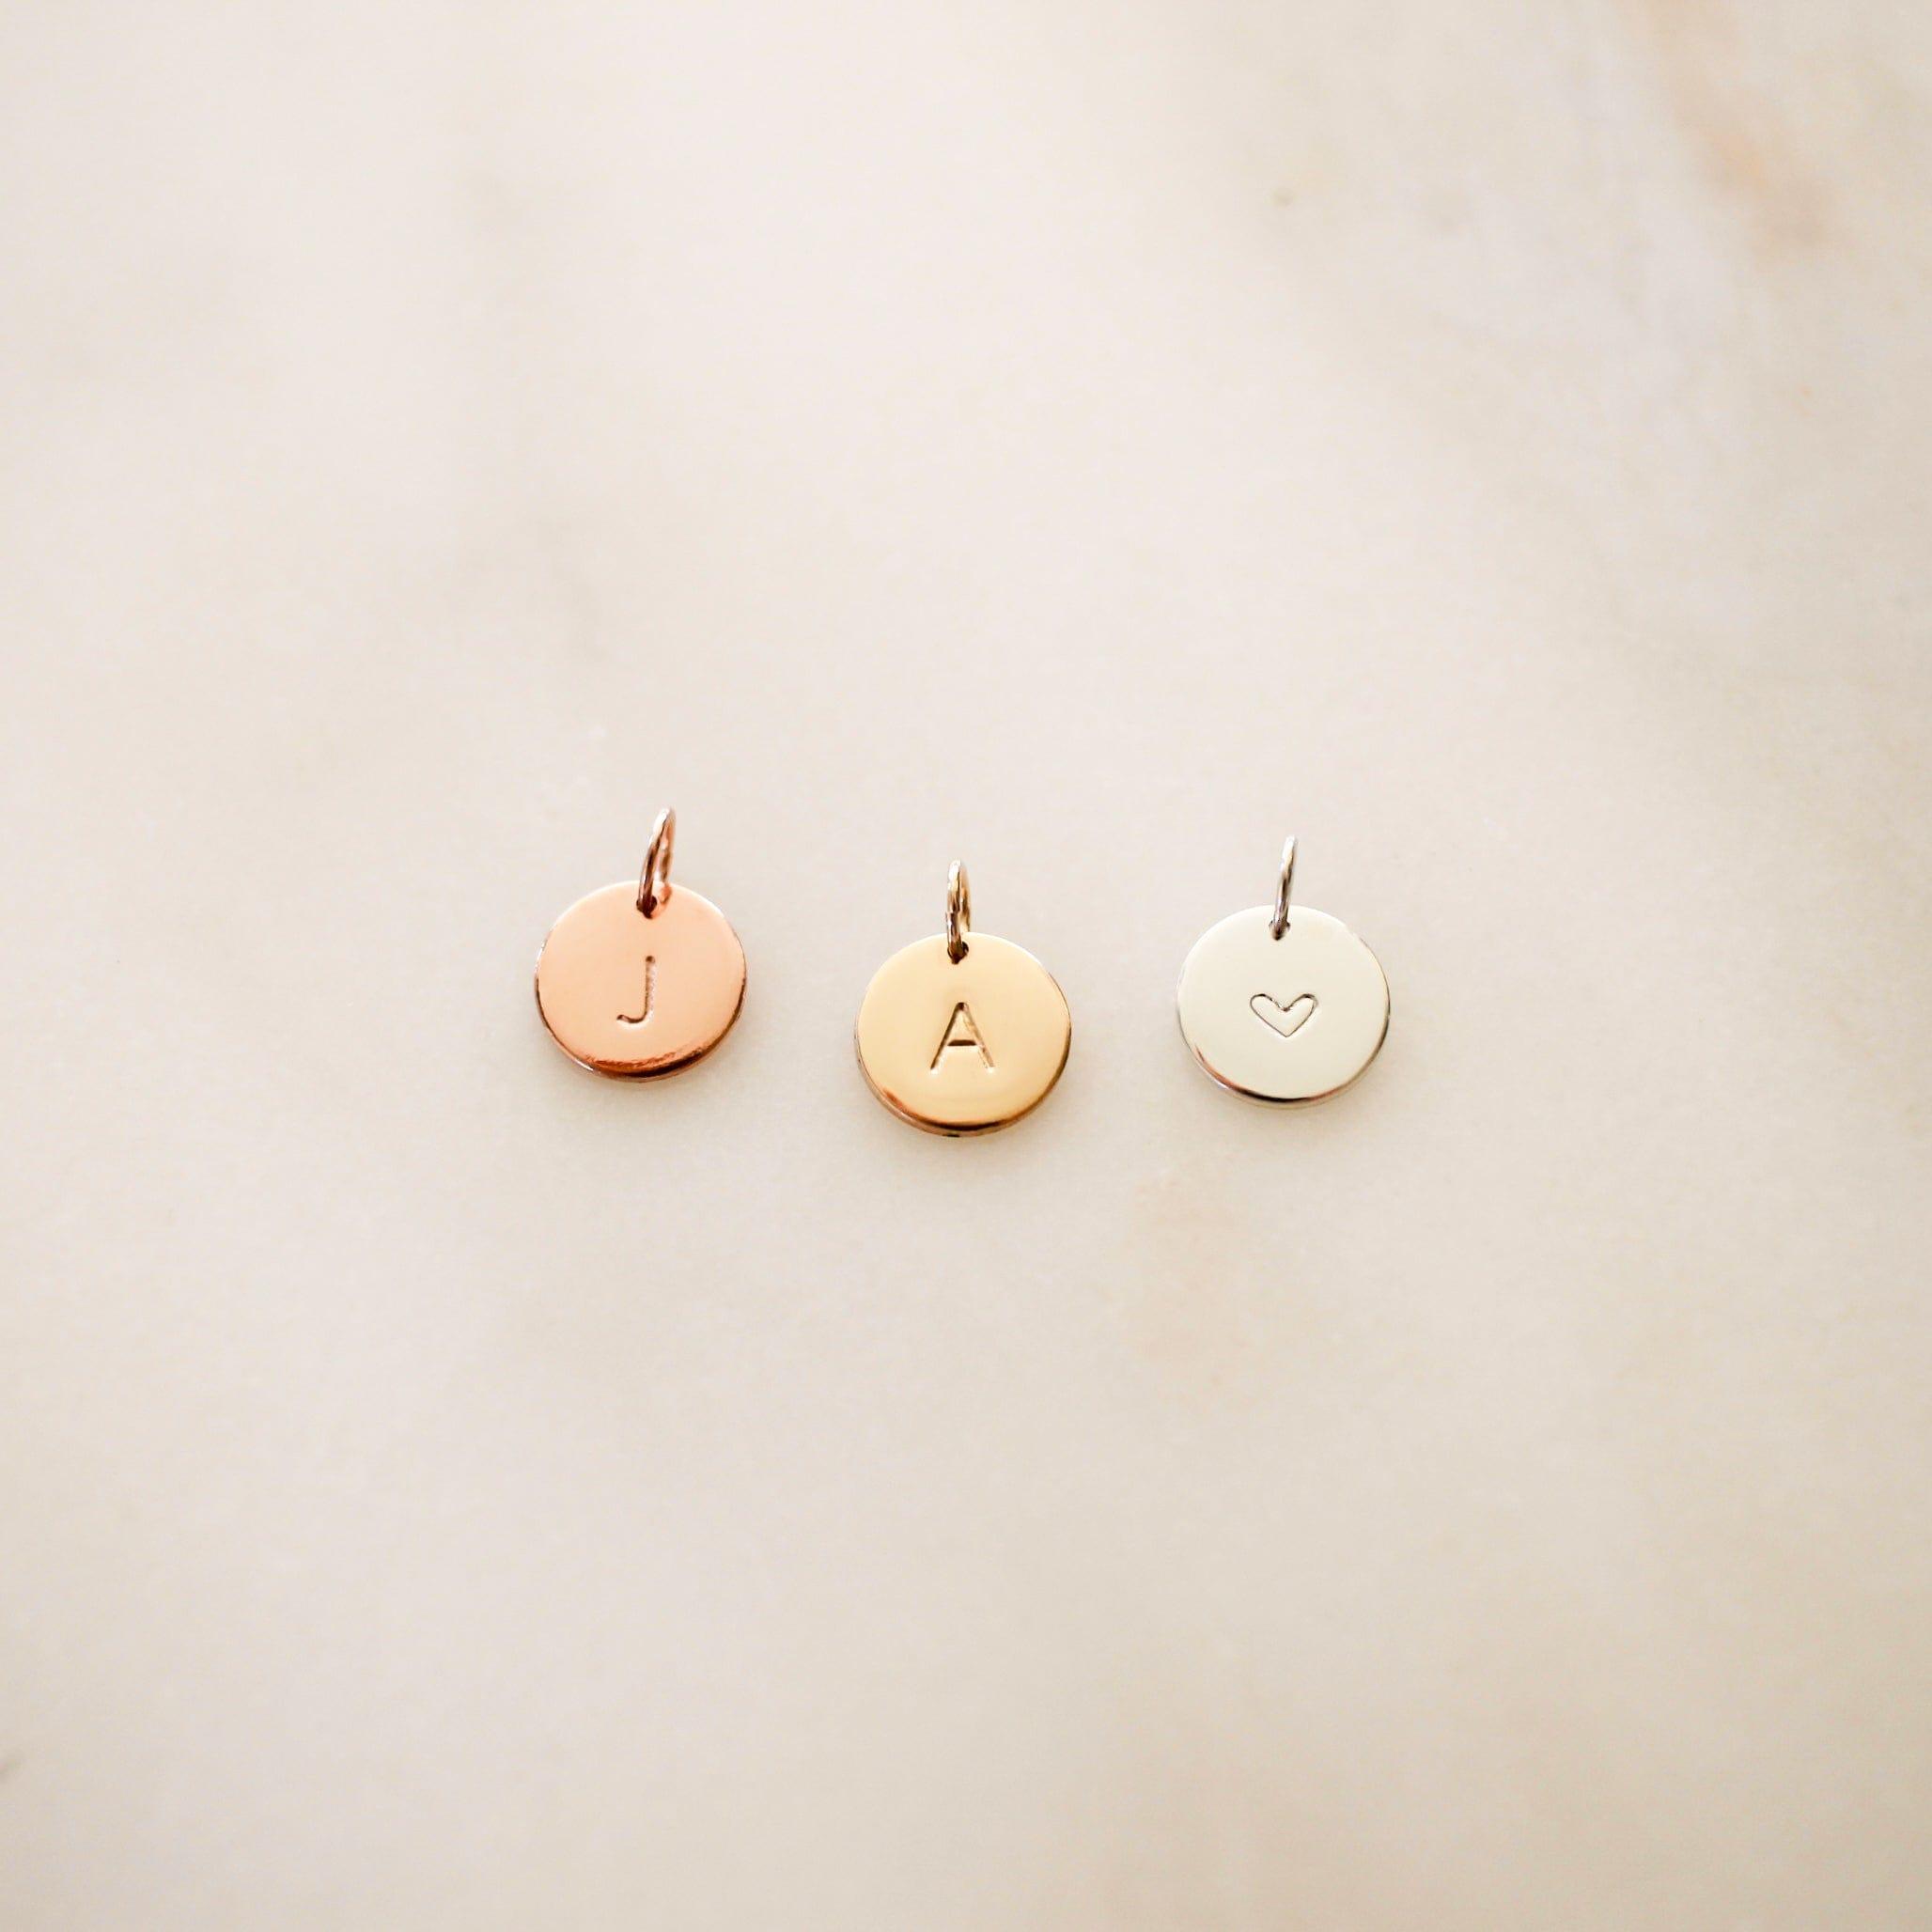 Original Disc Charm • Add On - Nolia Jewelry - Meaningful + Sustainably Handcrafted Jewelry